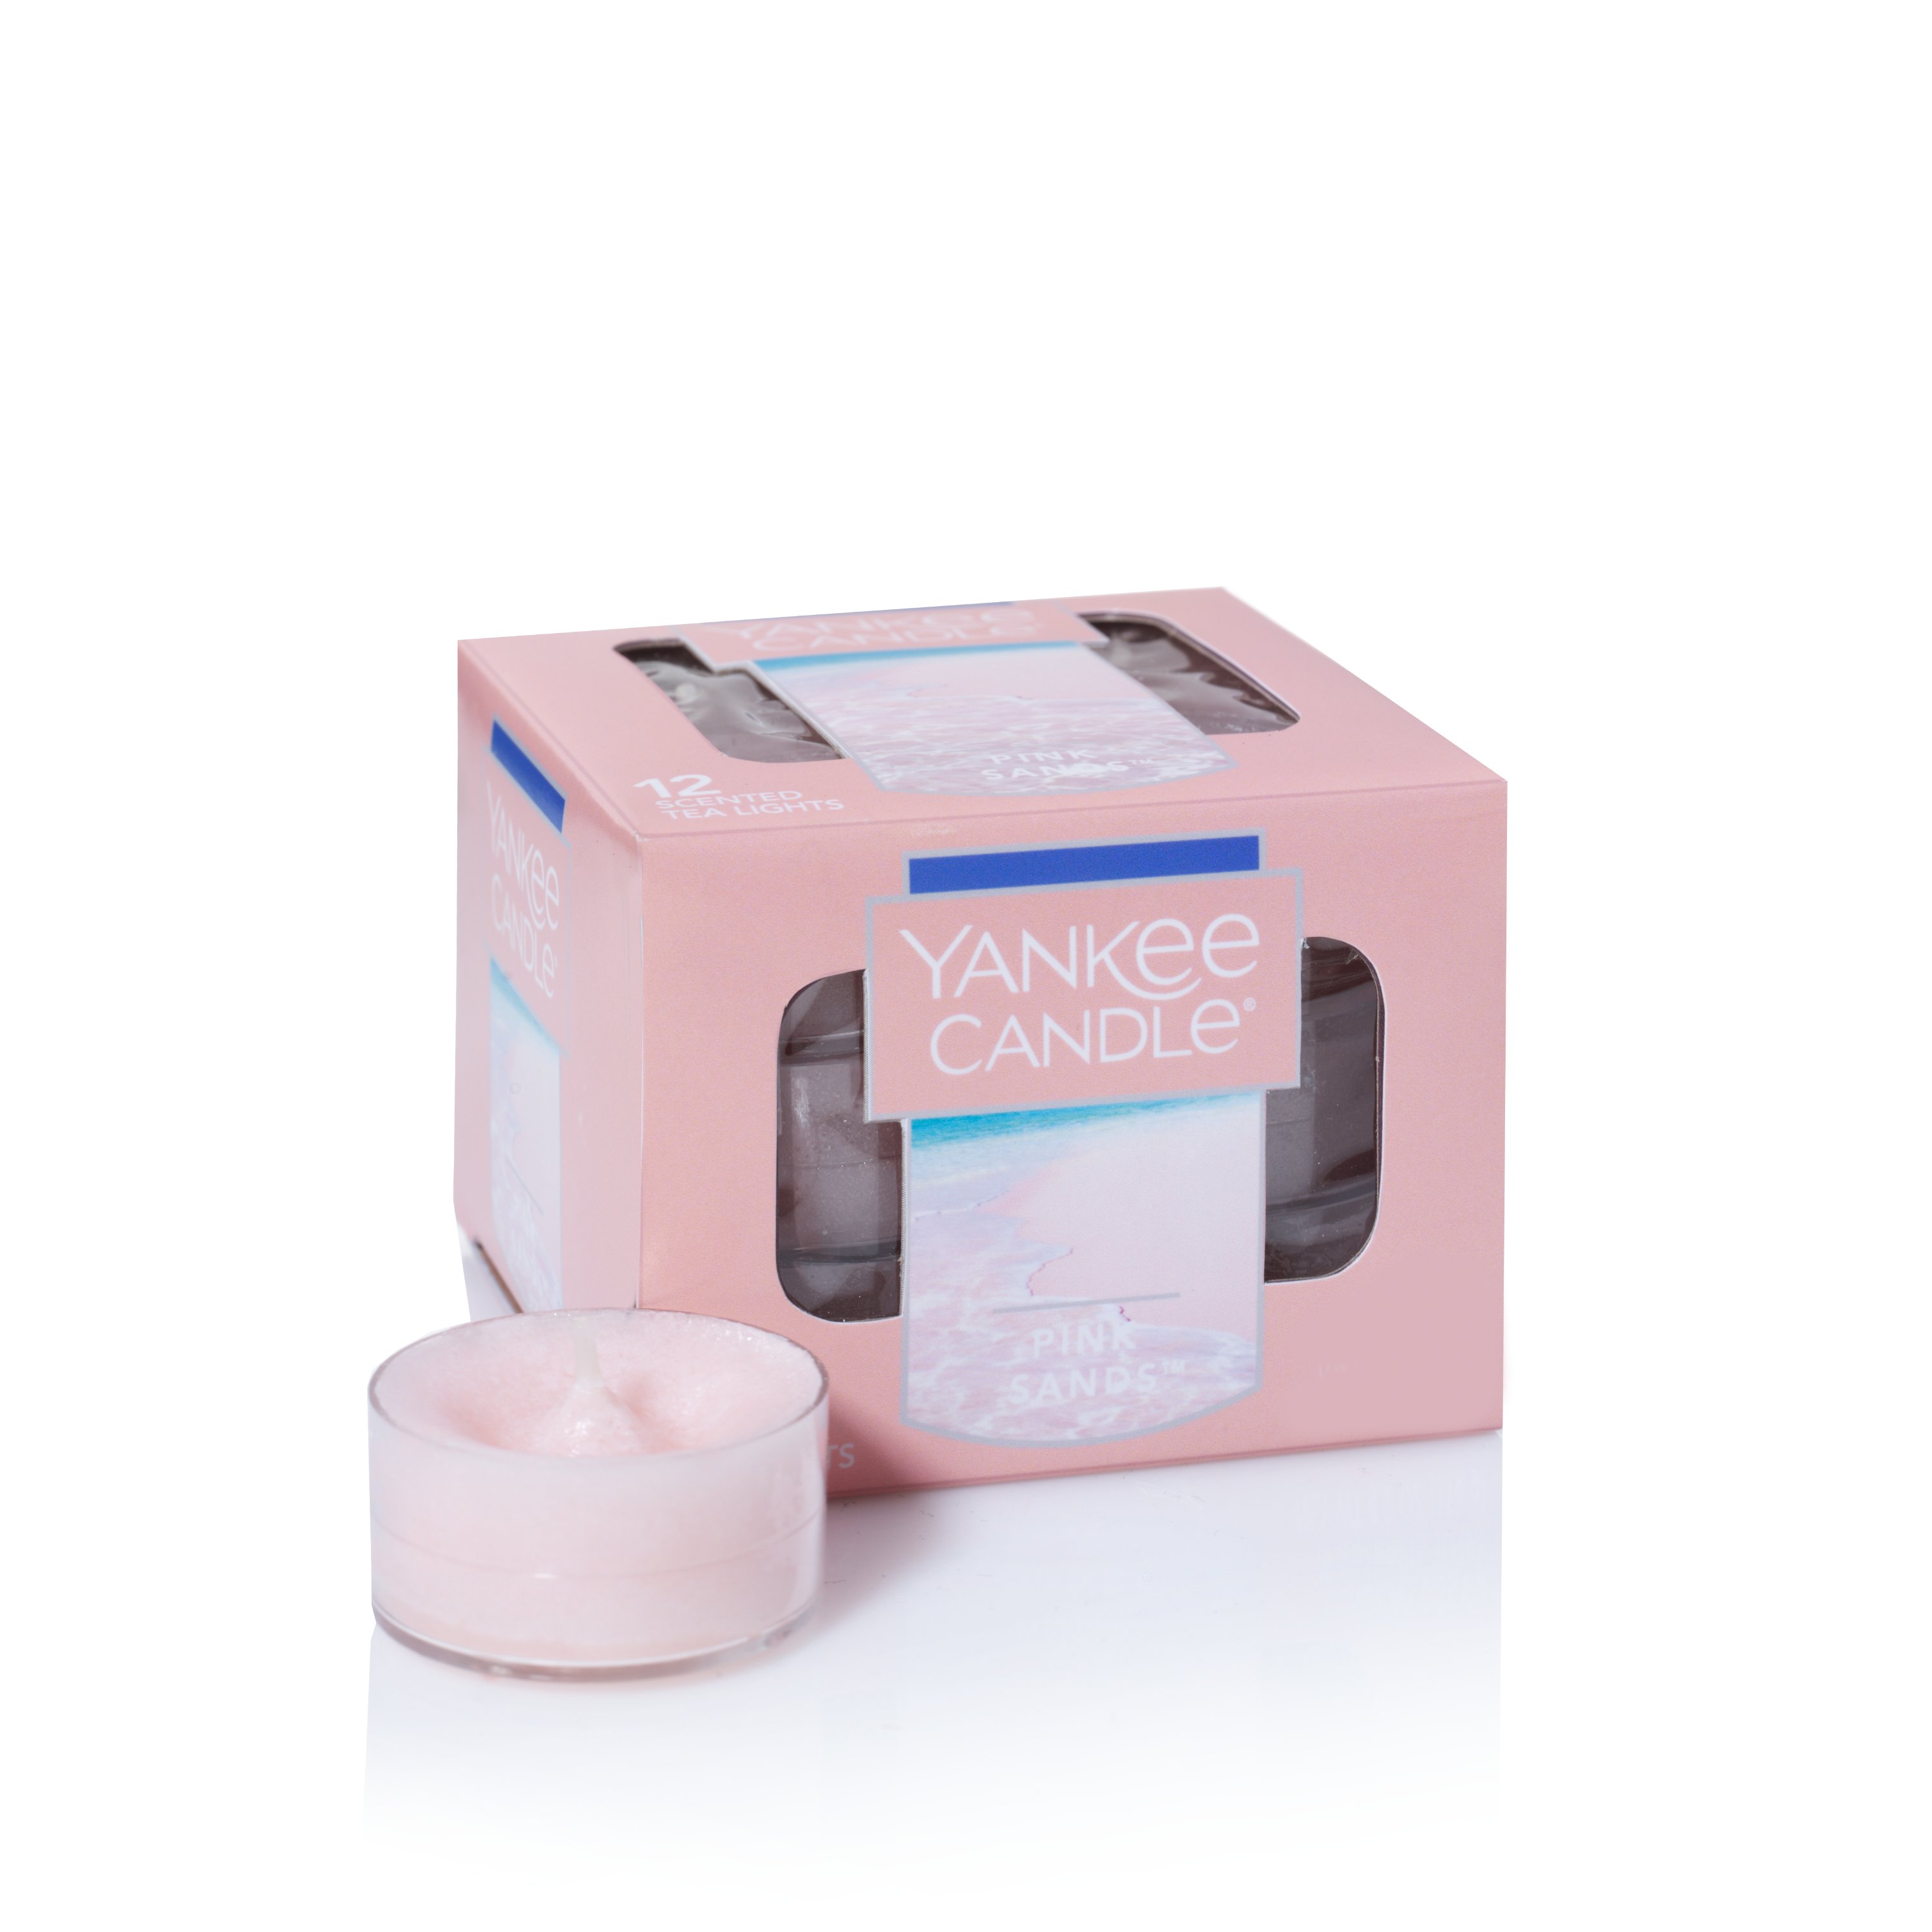 Yankee Candle Pink Sands 6 Pack Wax Melts